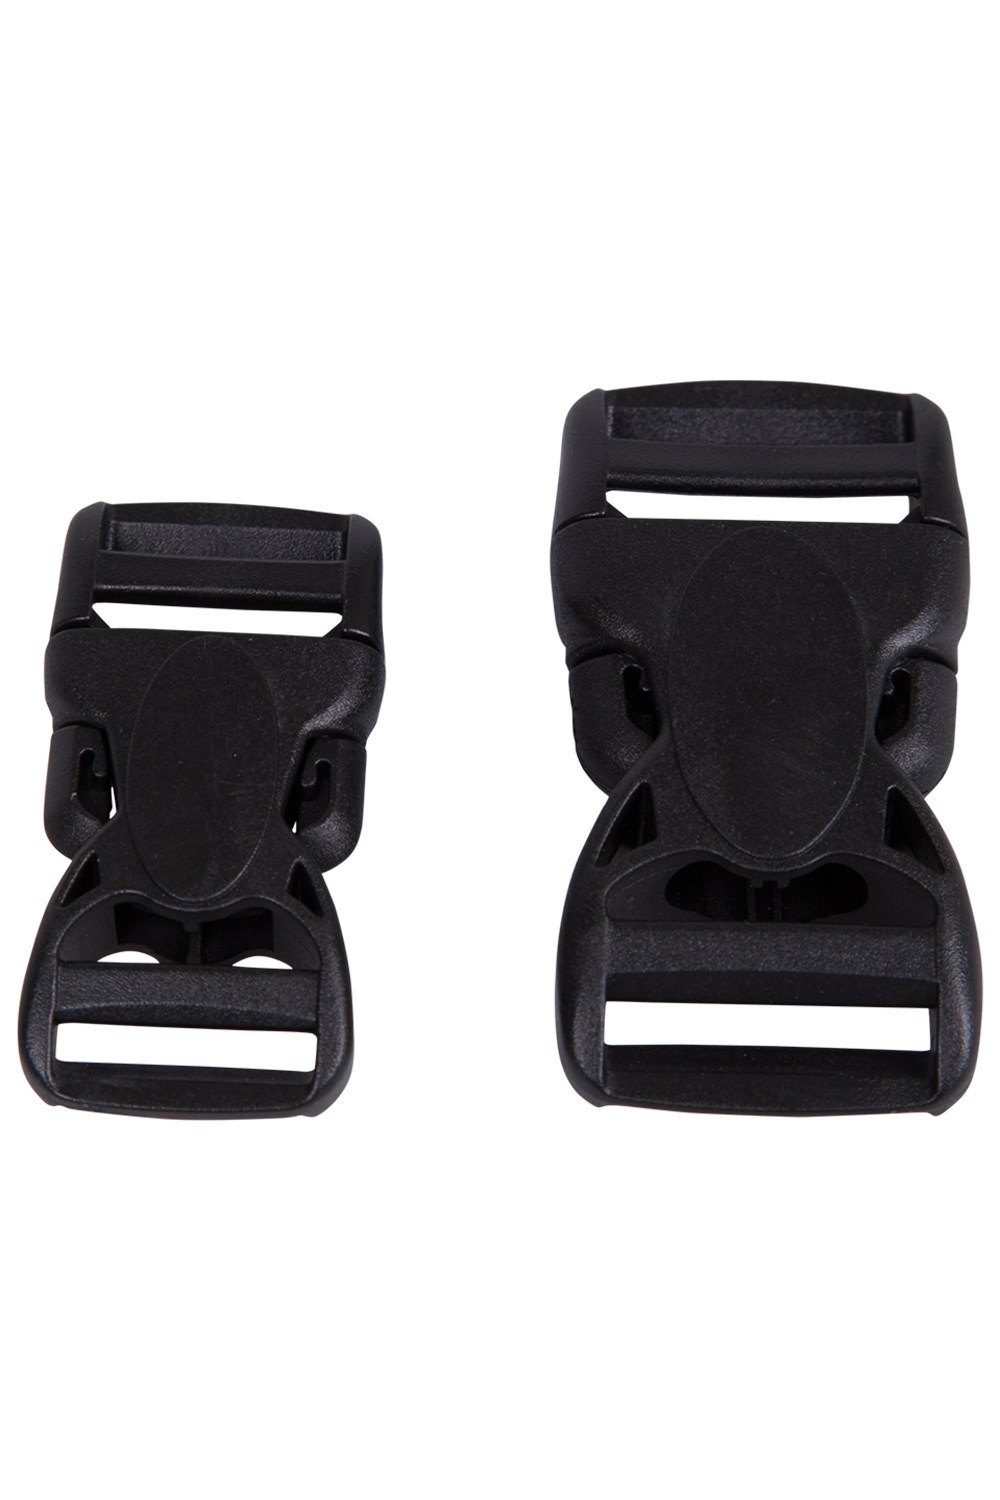 Mountain Warehouse Spare Quick Release Buckles ONE